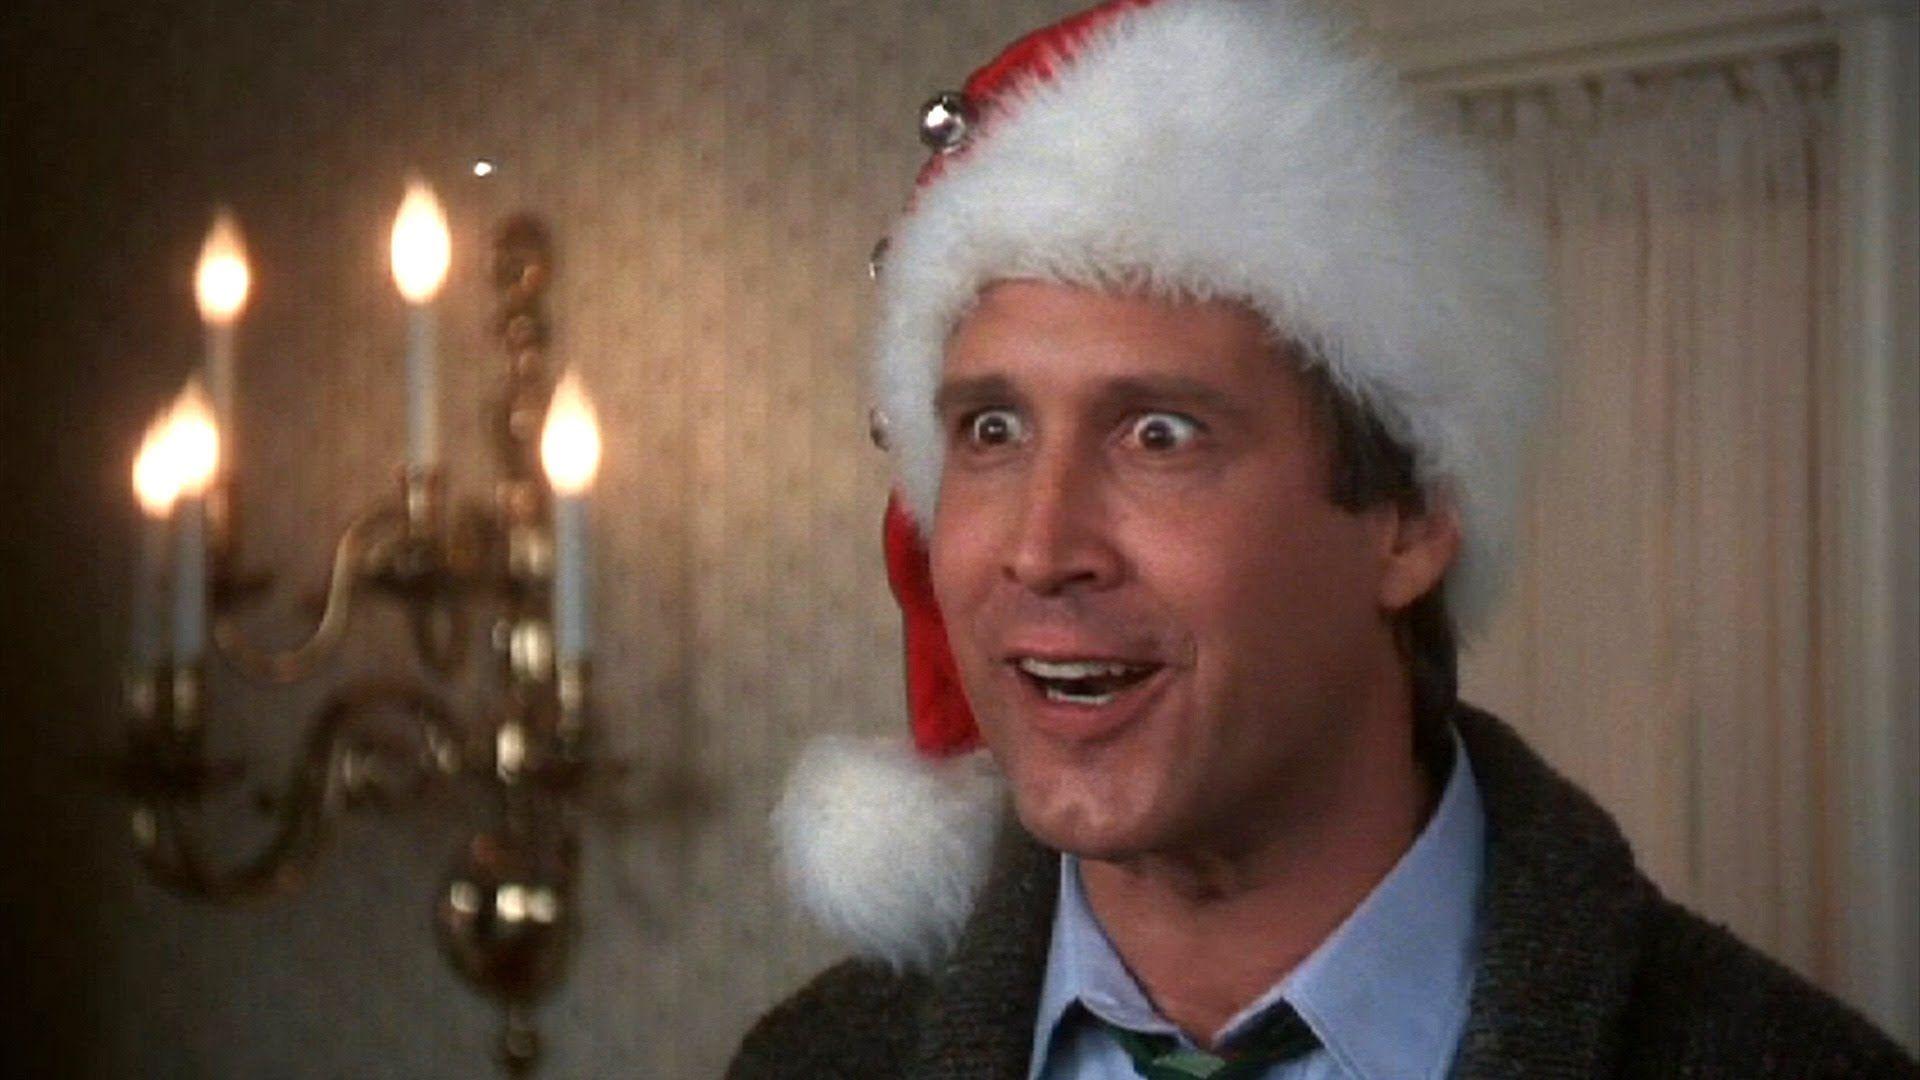 National Lampoons Christmas Vacation Wallpapers  Wallpaper Cave